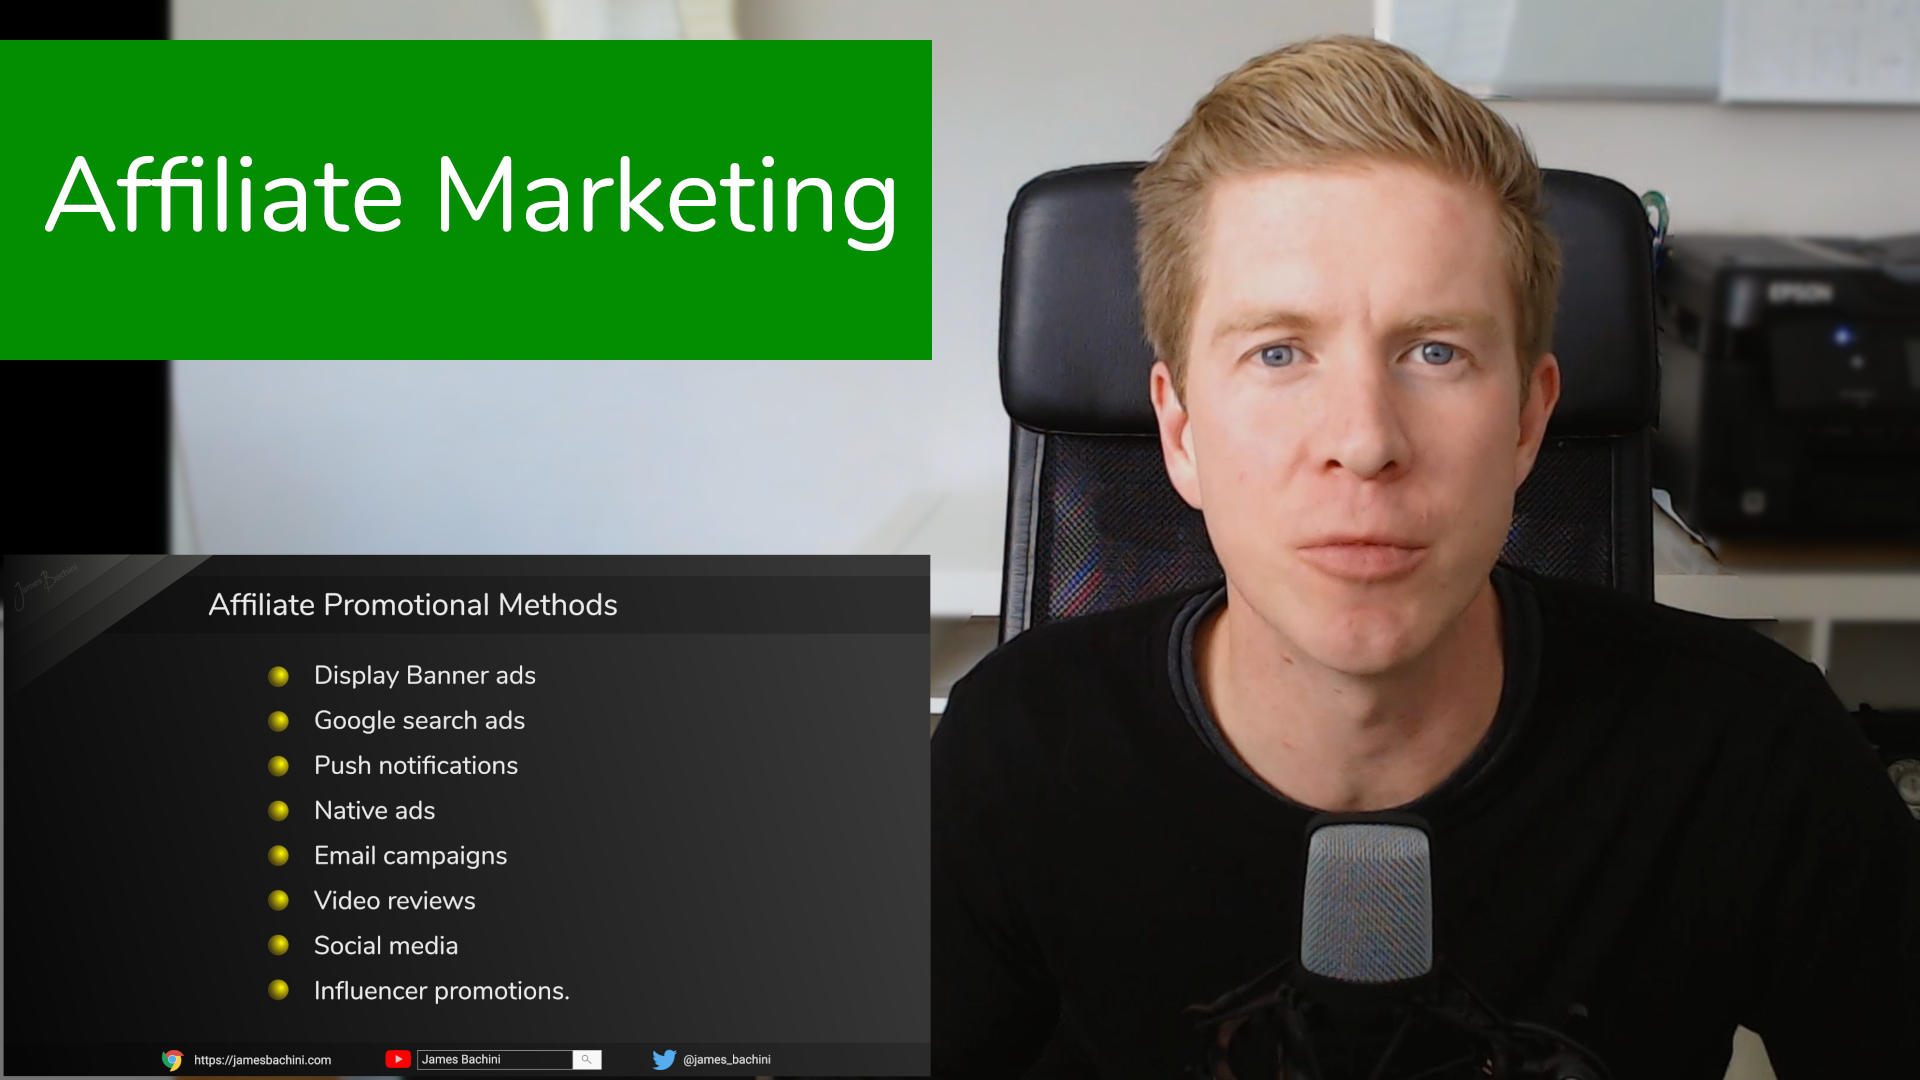 What does Affiliate Marketing mean? 1